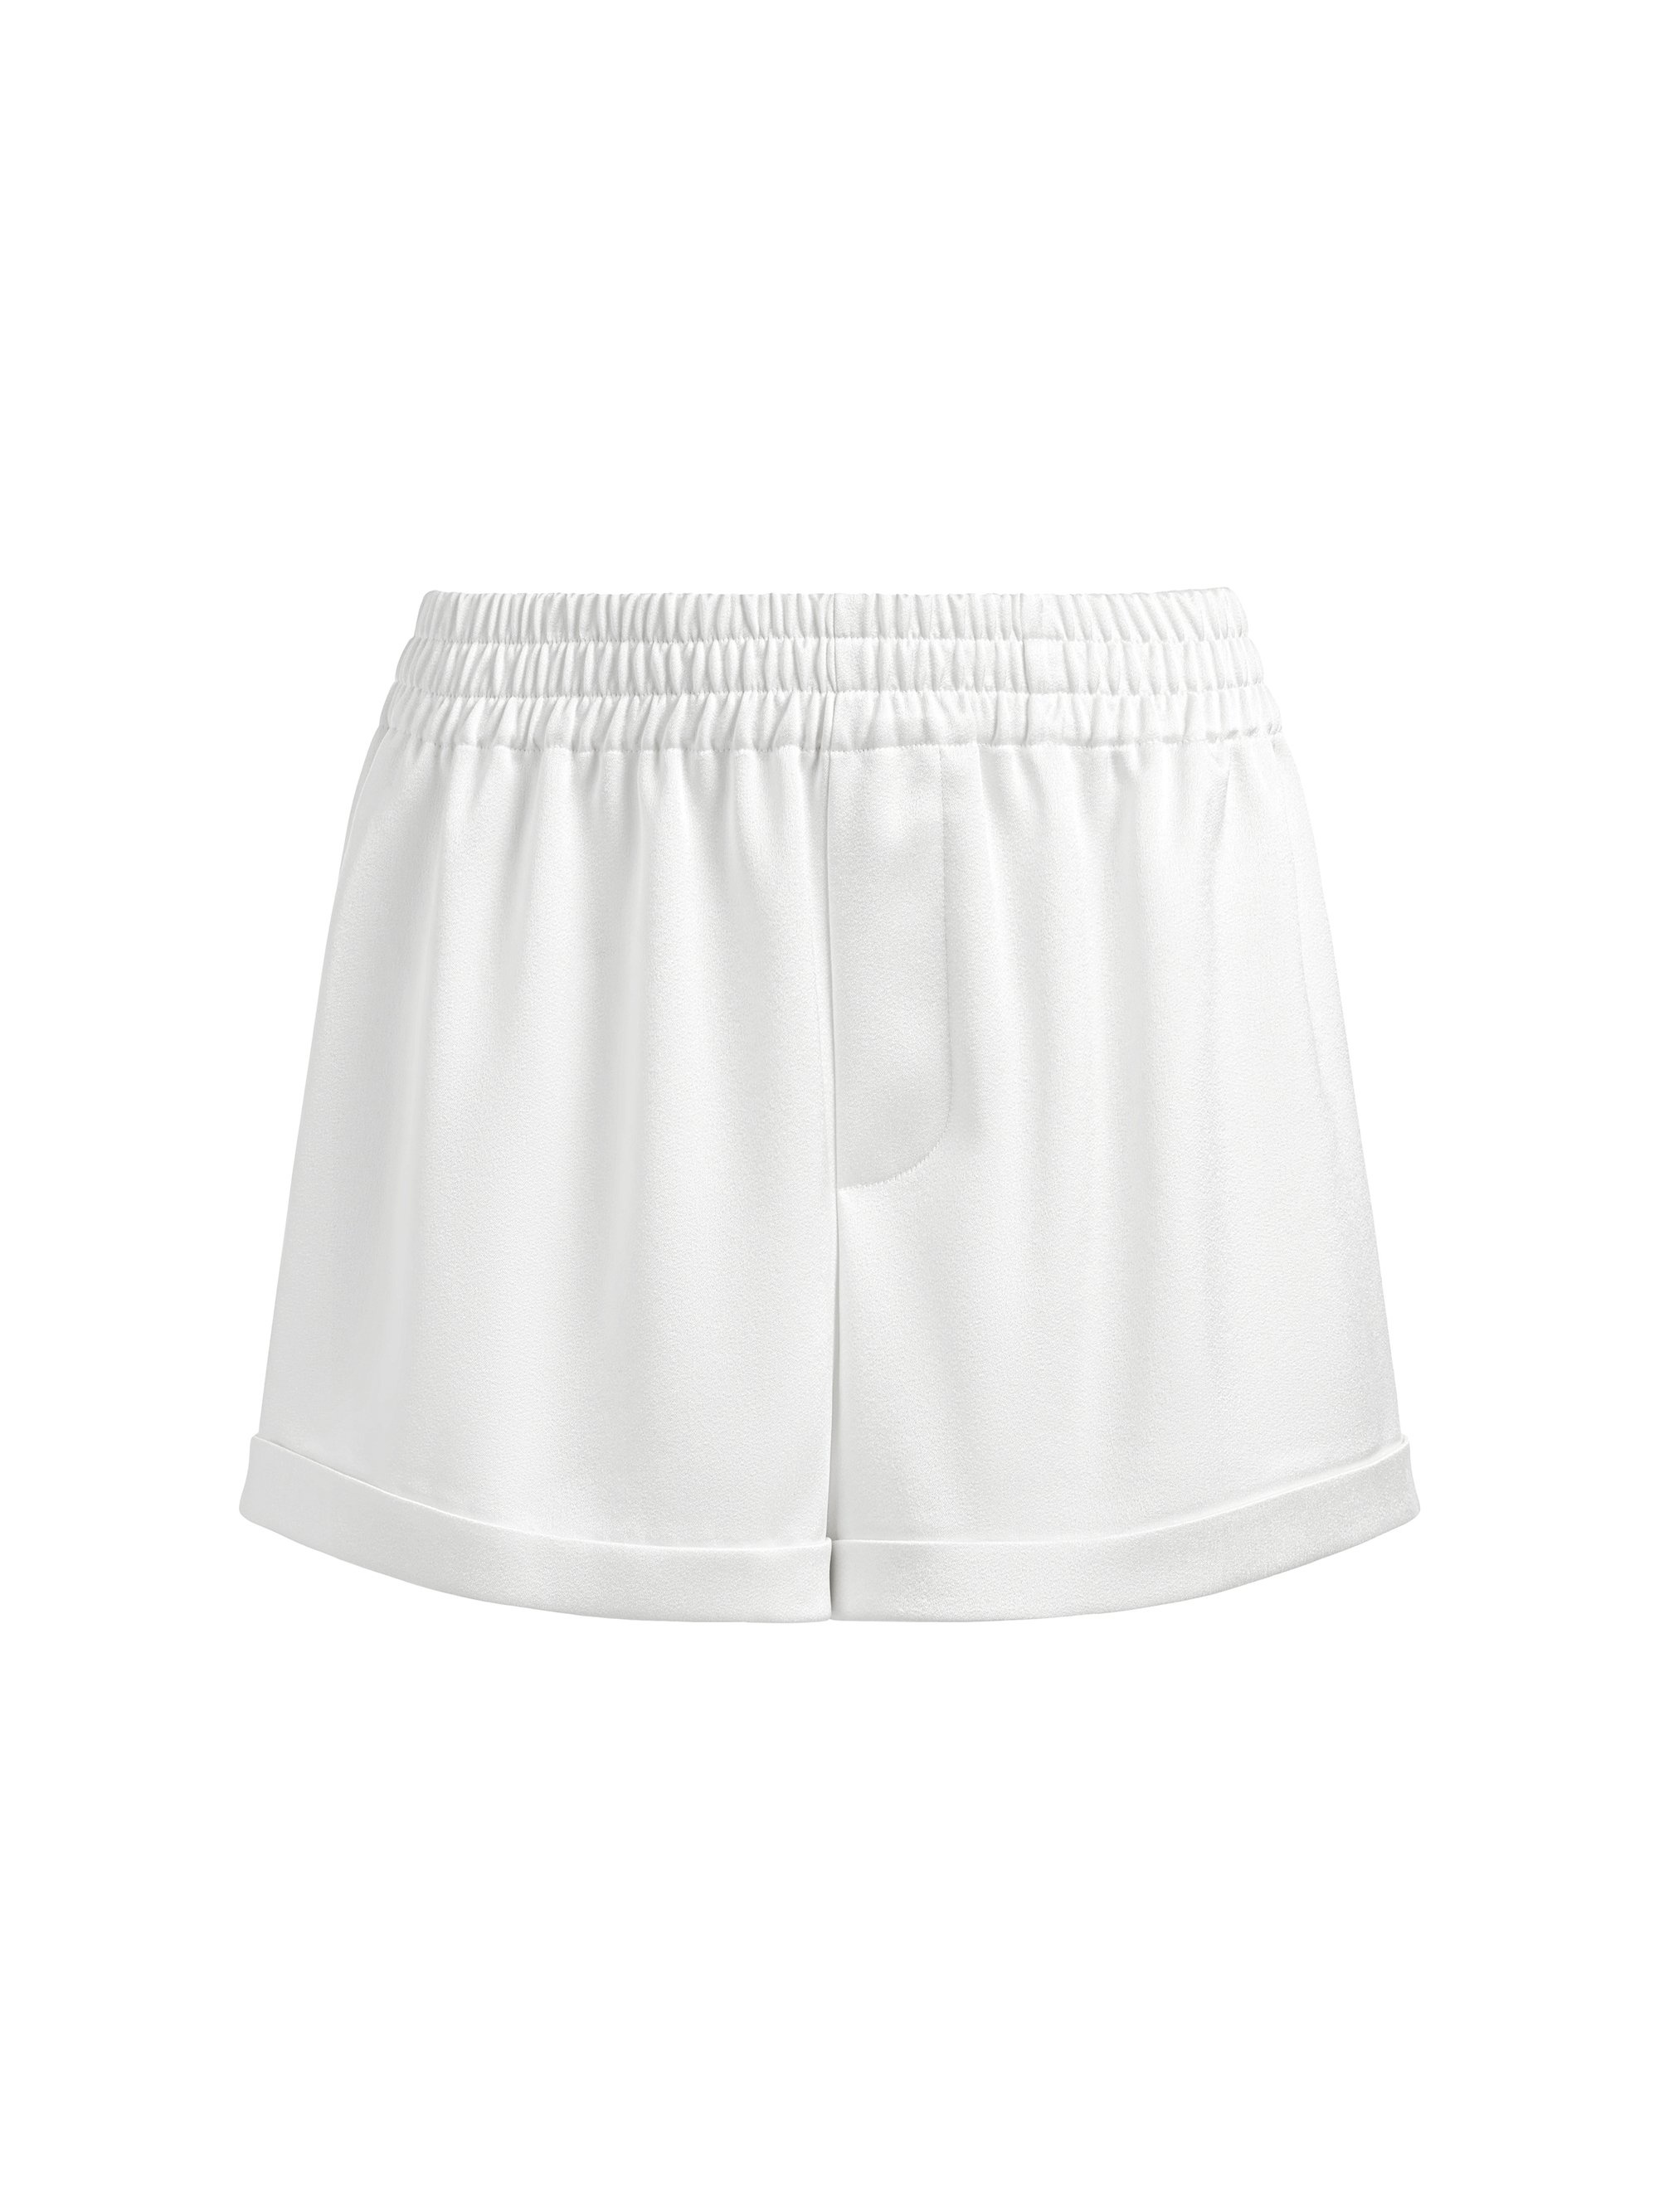 RICHIE CUFFED LOW RISE BOXER SHORT - 1